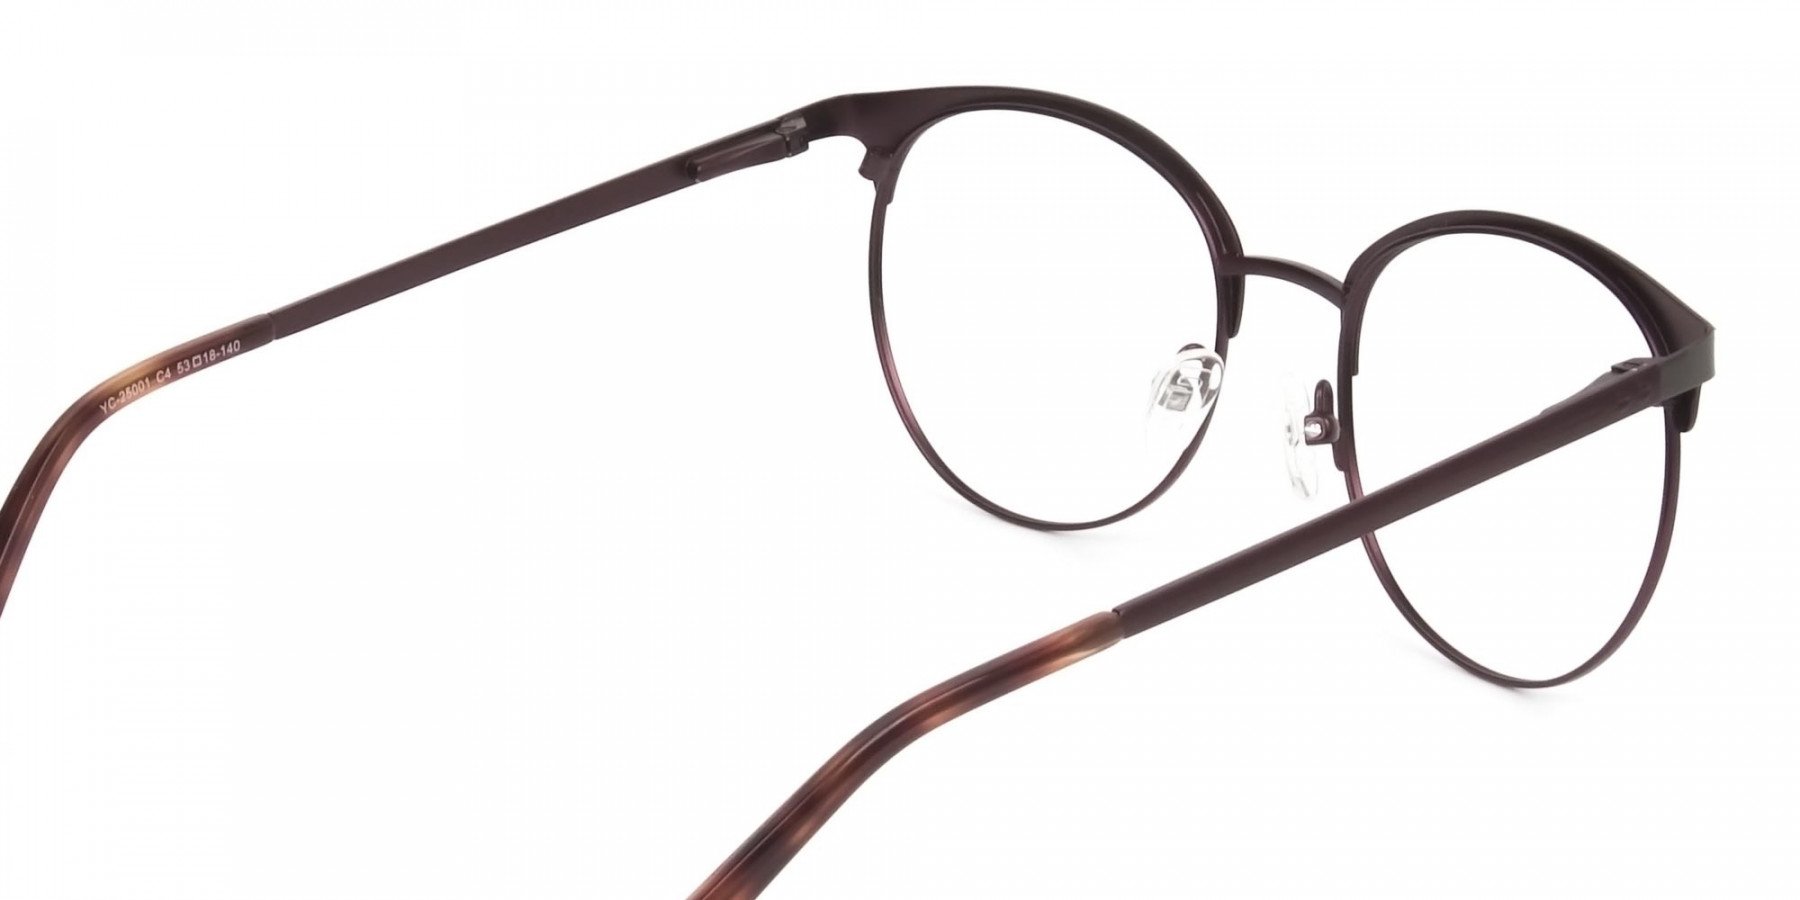 Brown & Gunmetal Clubmaster Glasses in Round - 1